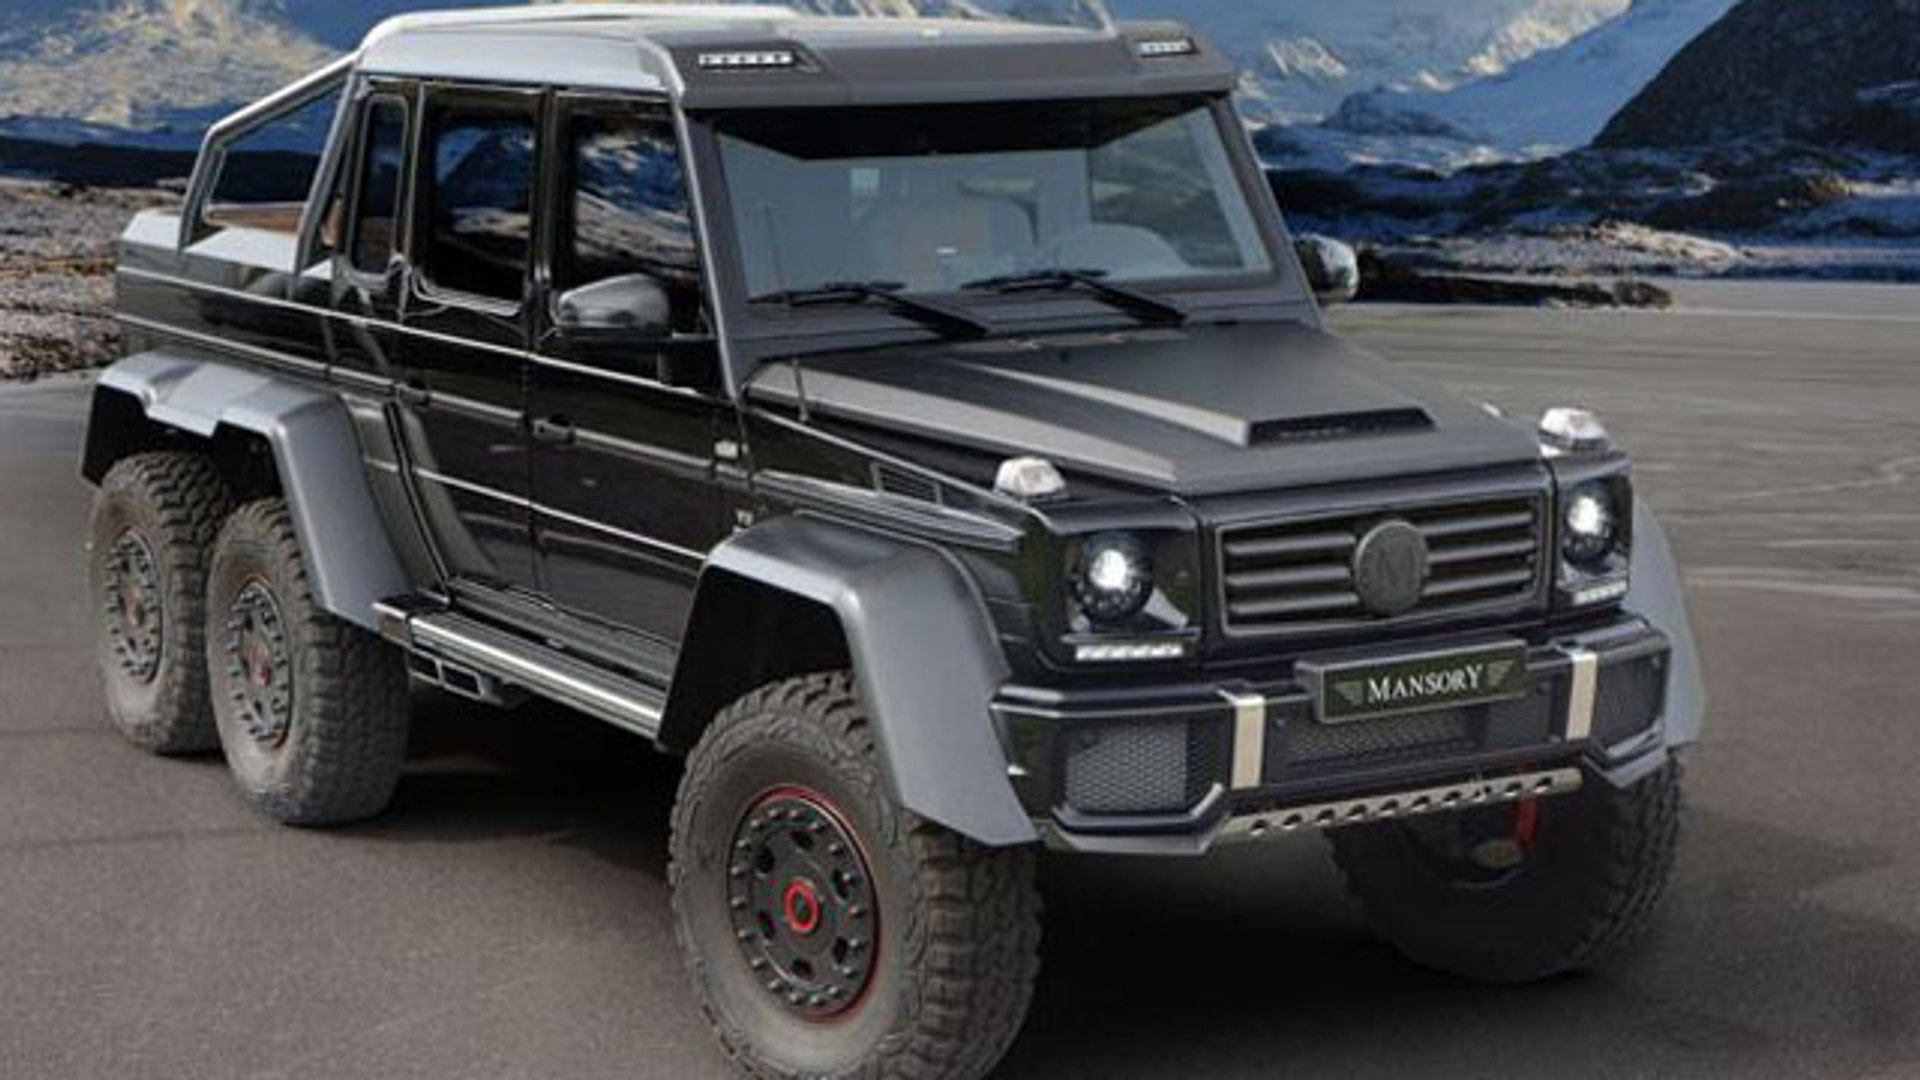 Mercedes Benz G63 6x6 Tuned By Mansory Revealed